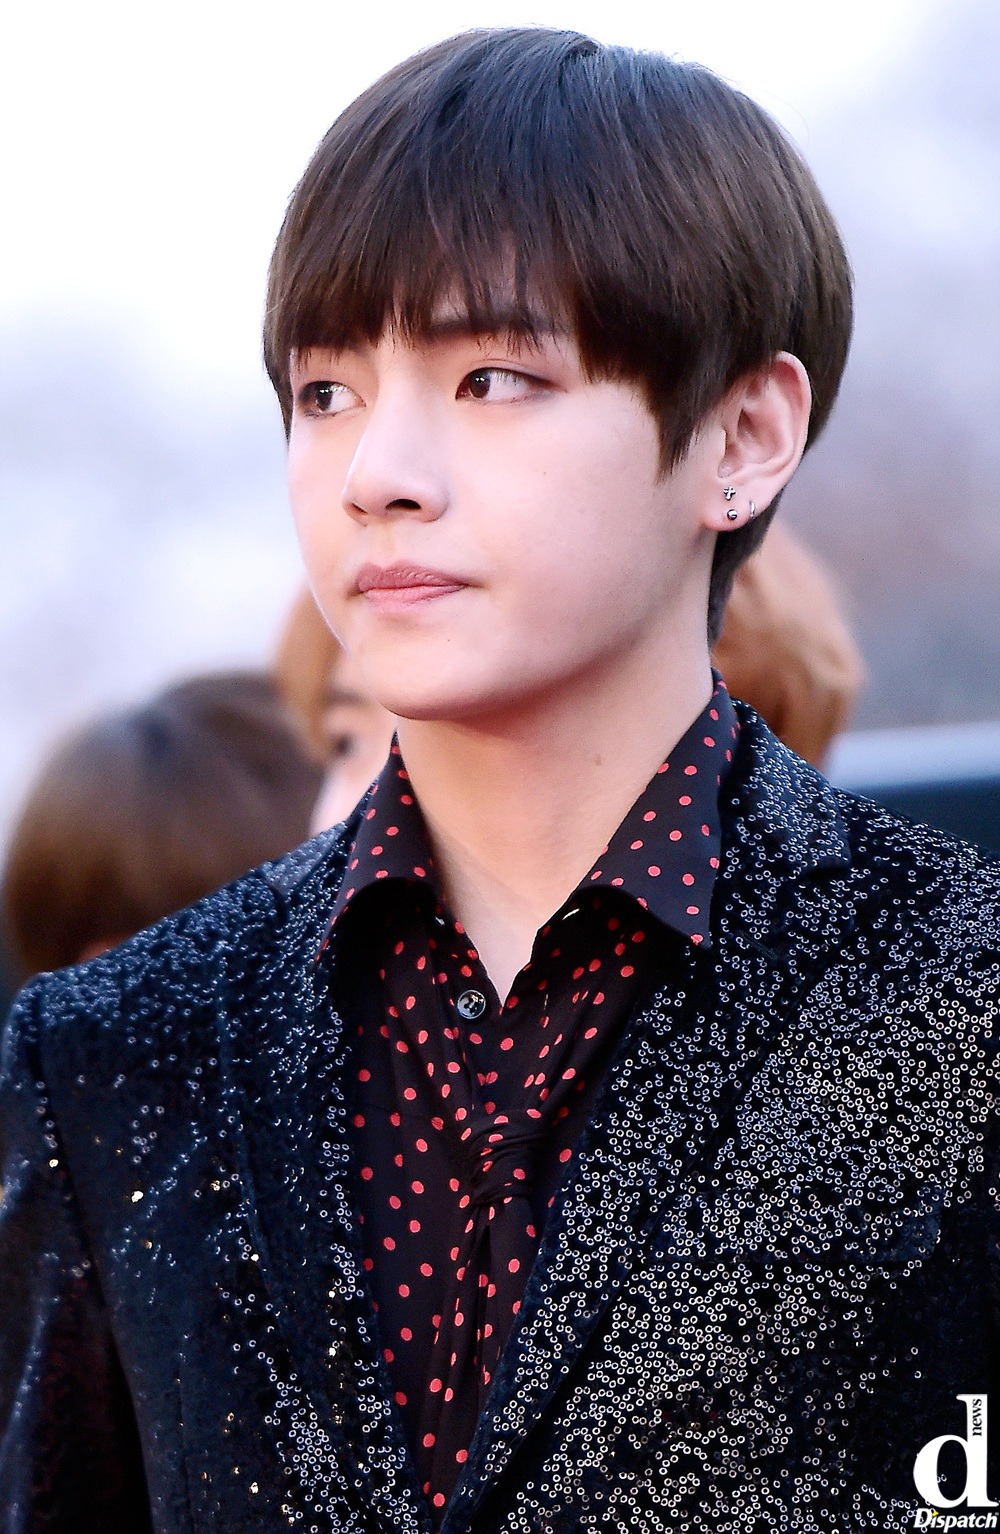 Here Are The Top 10 Most Iconic Fashion Moments Of BTS's V - Koreaboo